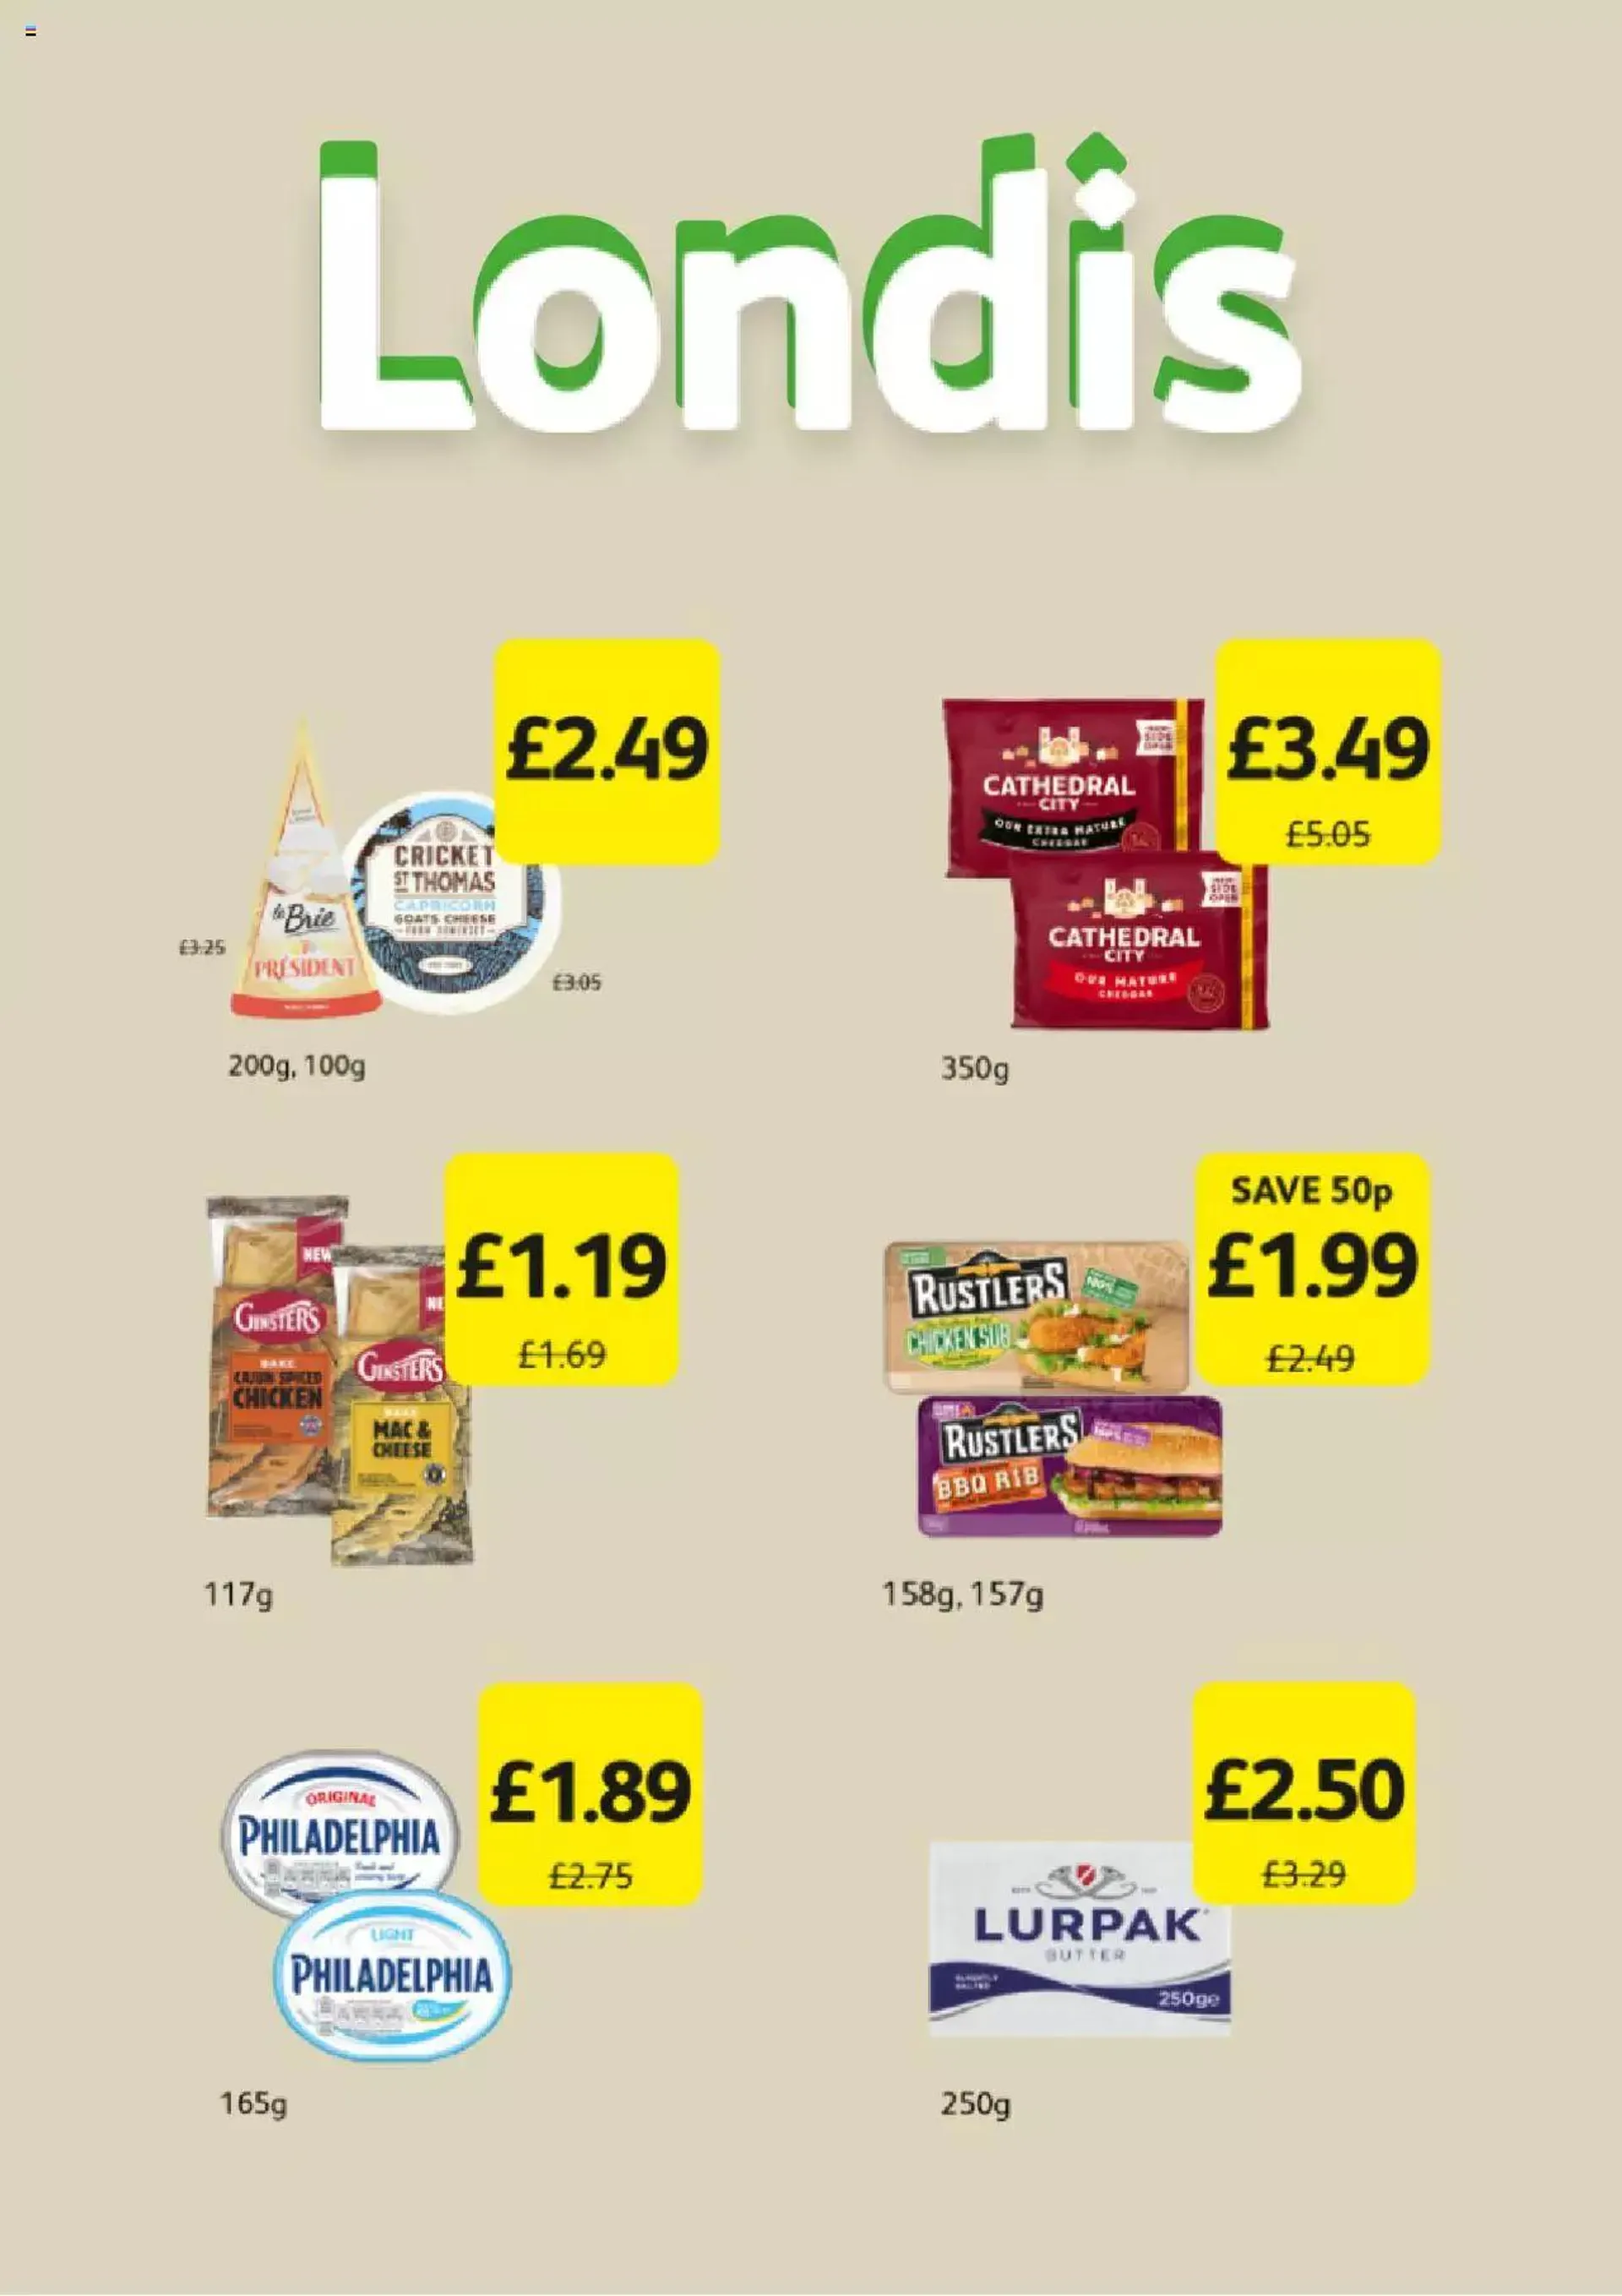 Londis - Christmas Offers - 1